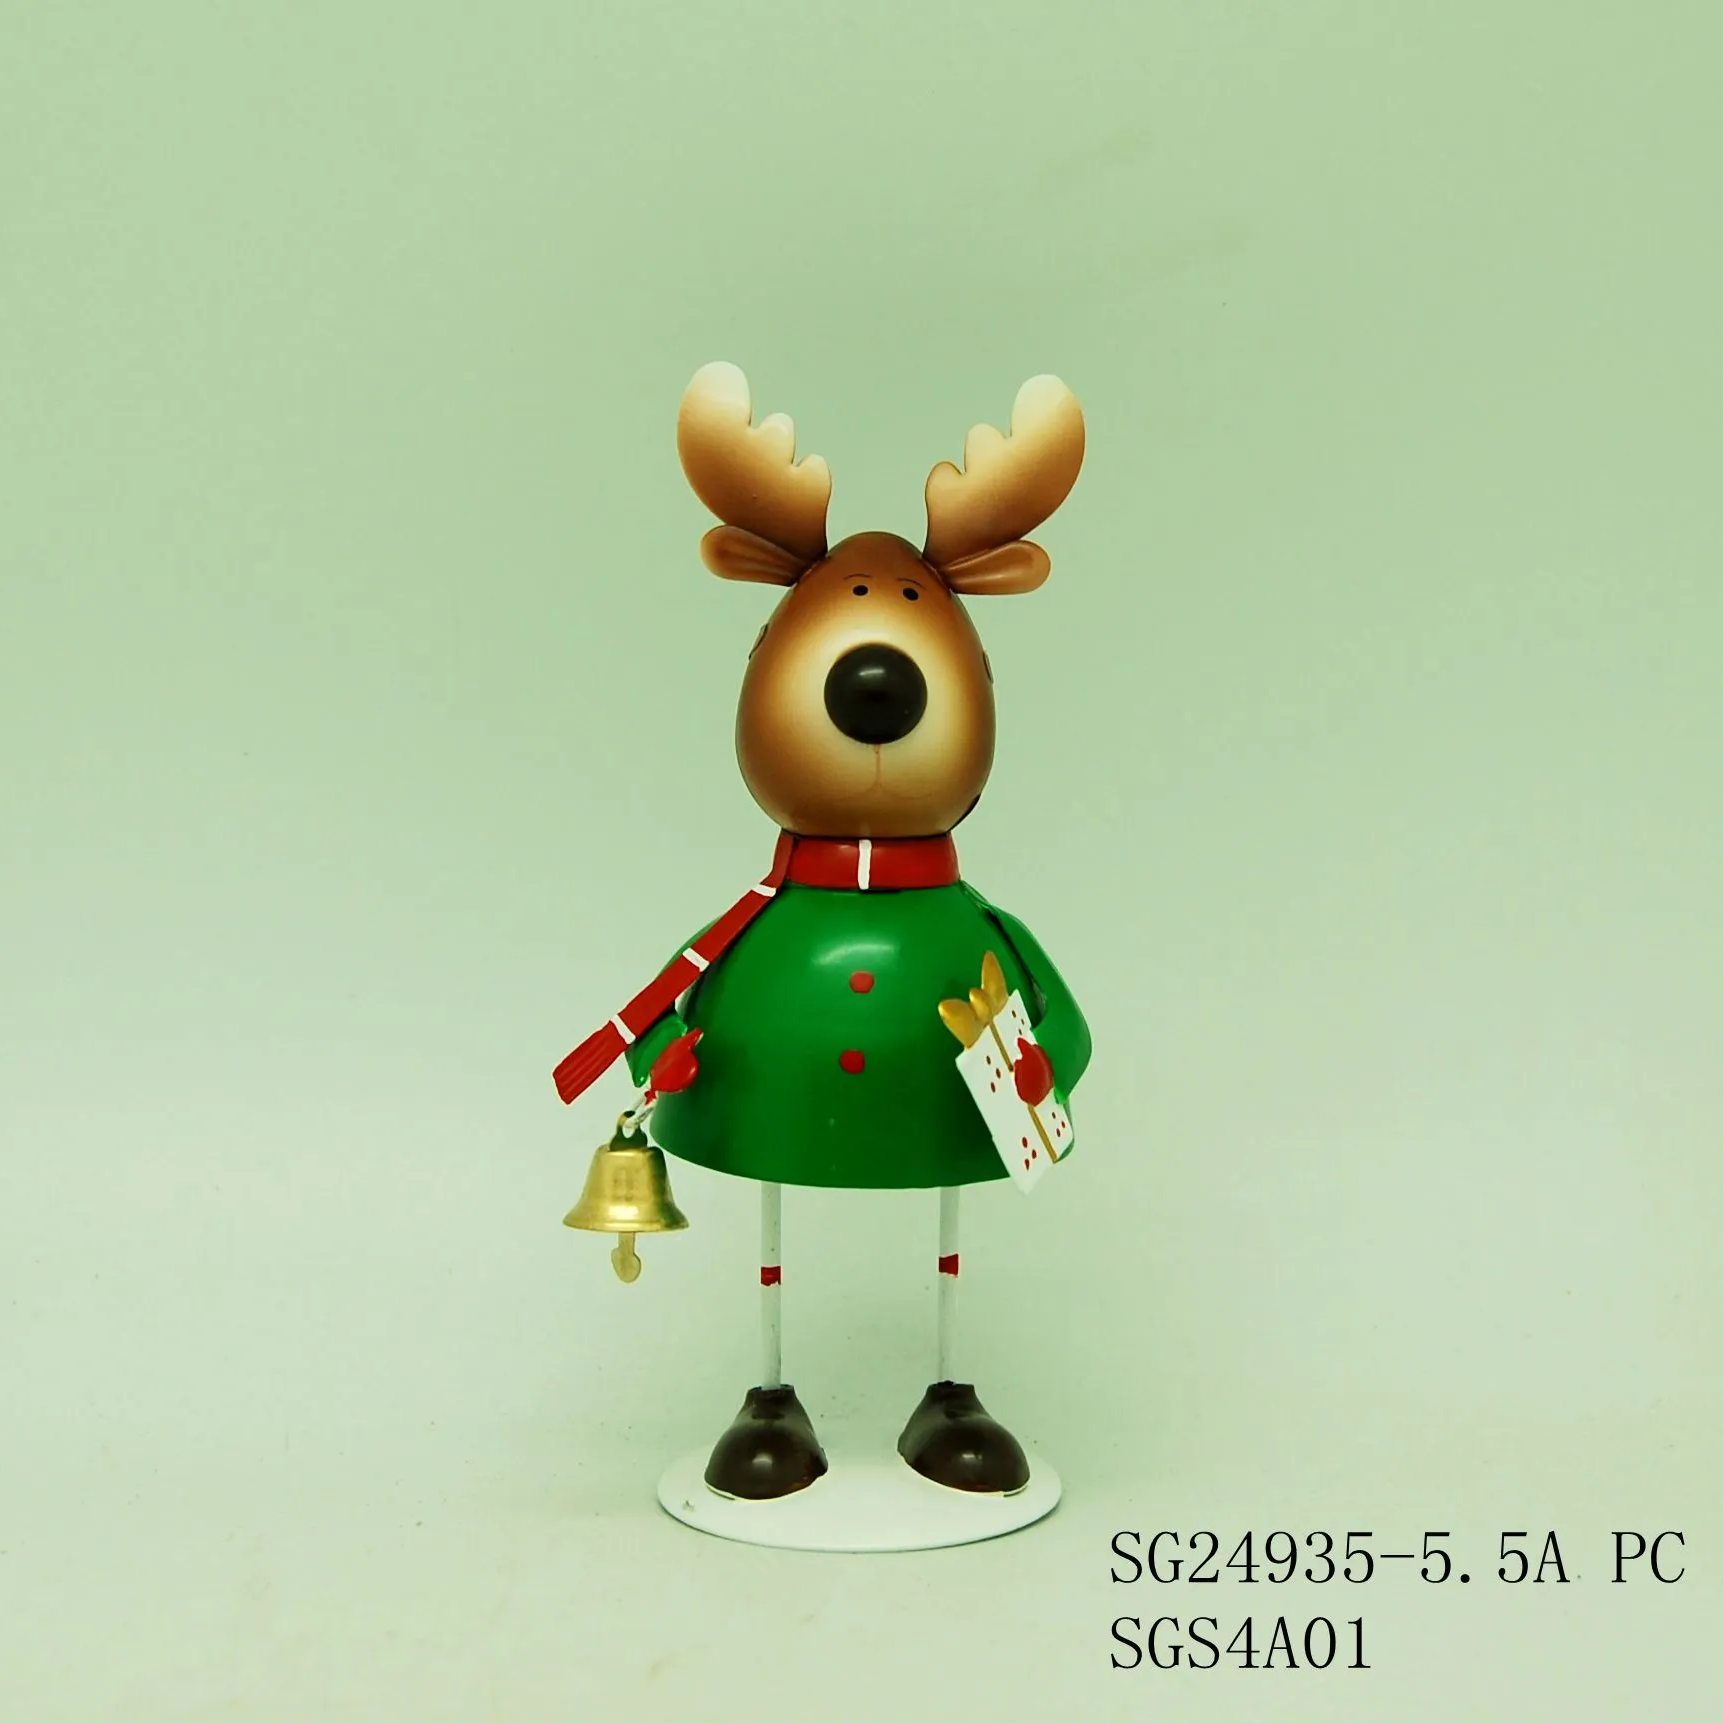 Small Size Metal Christmas Reindeer Decorations for Gifts